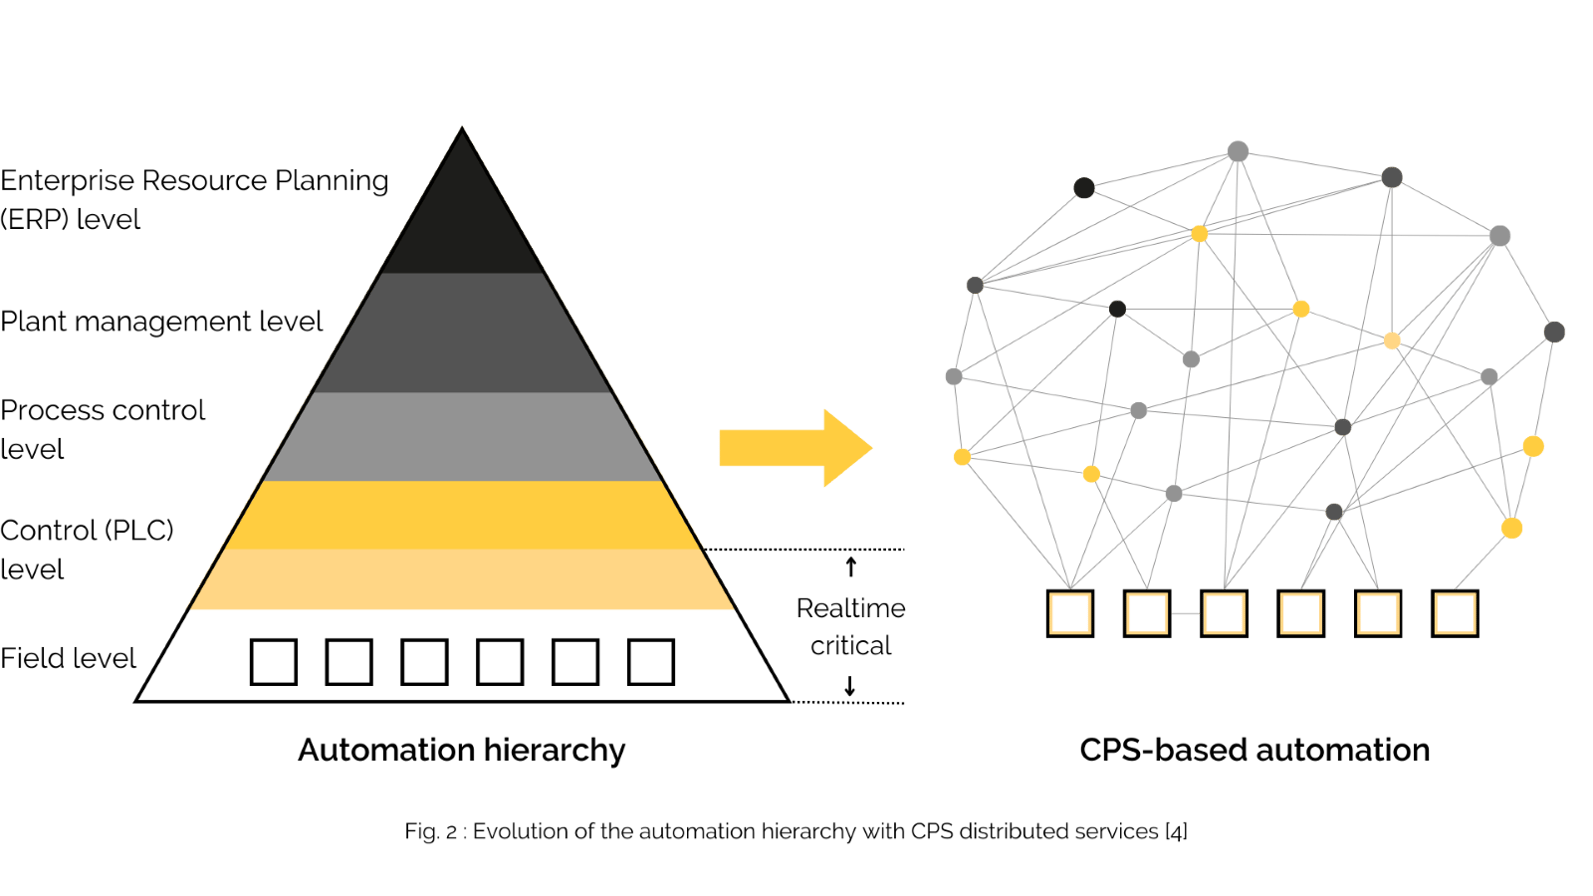 Evolution of the automation hierarchy with CPS distributed services